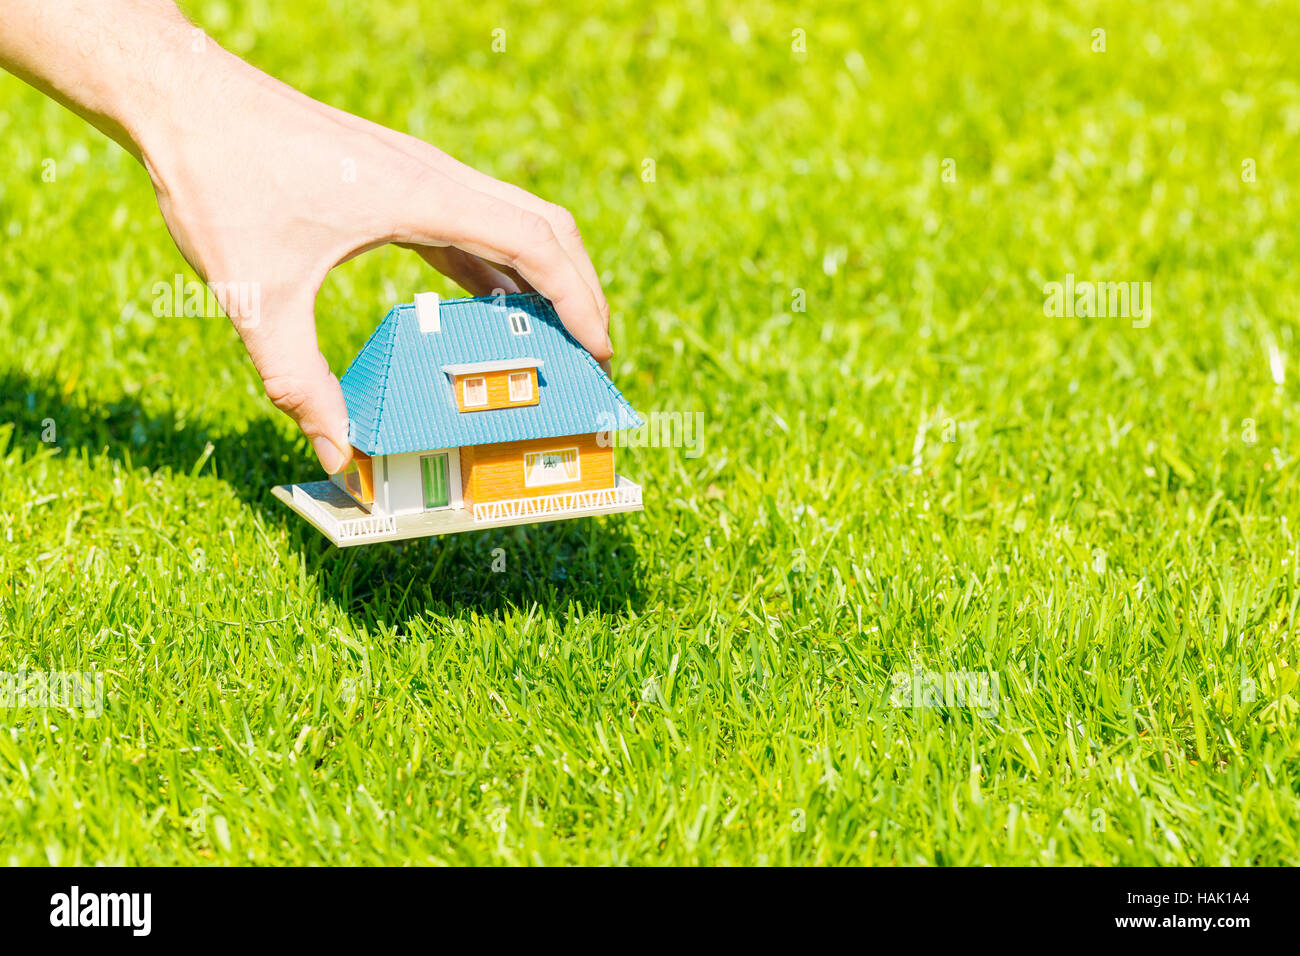 new home concept, hand putting house scale model on grass Stock Photo